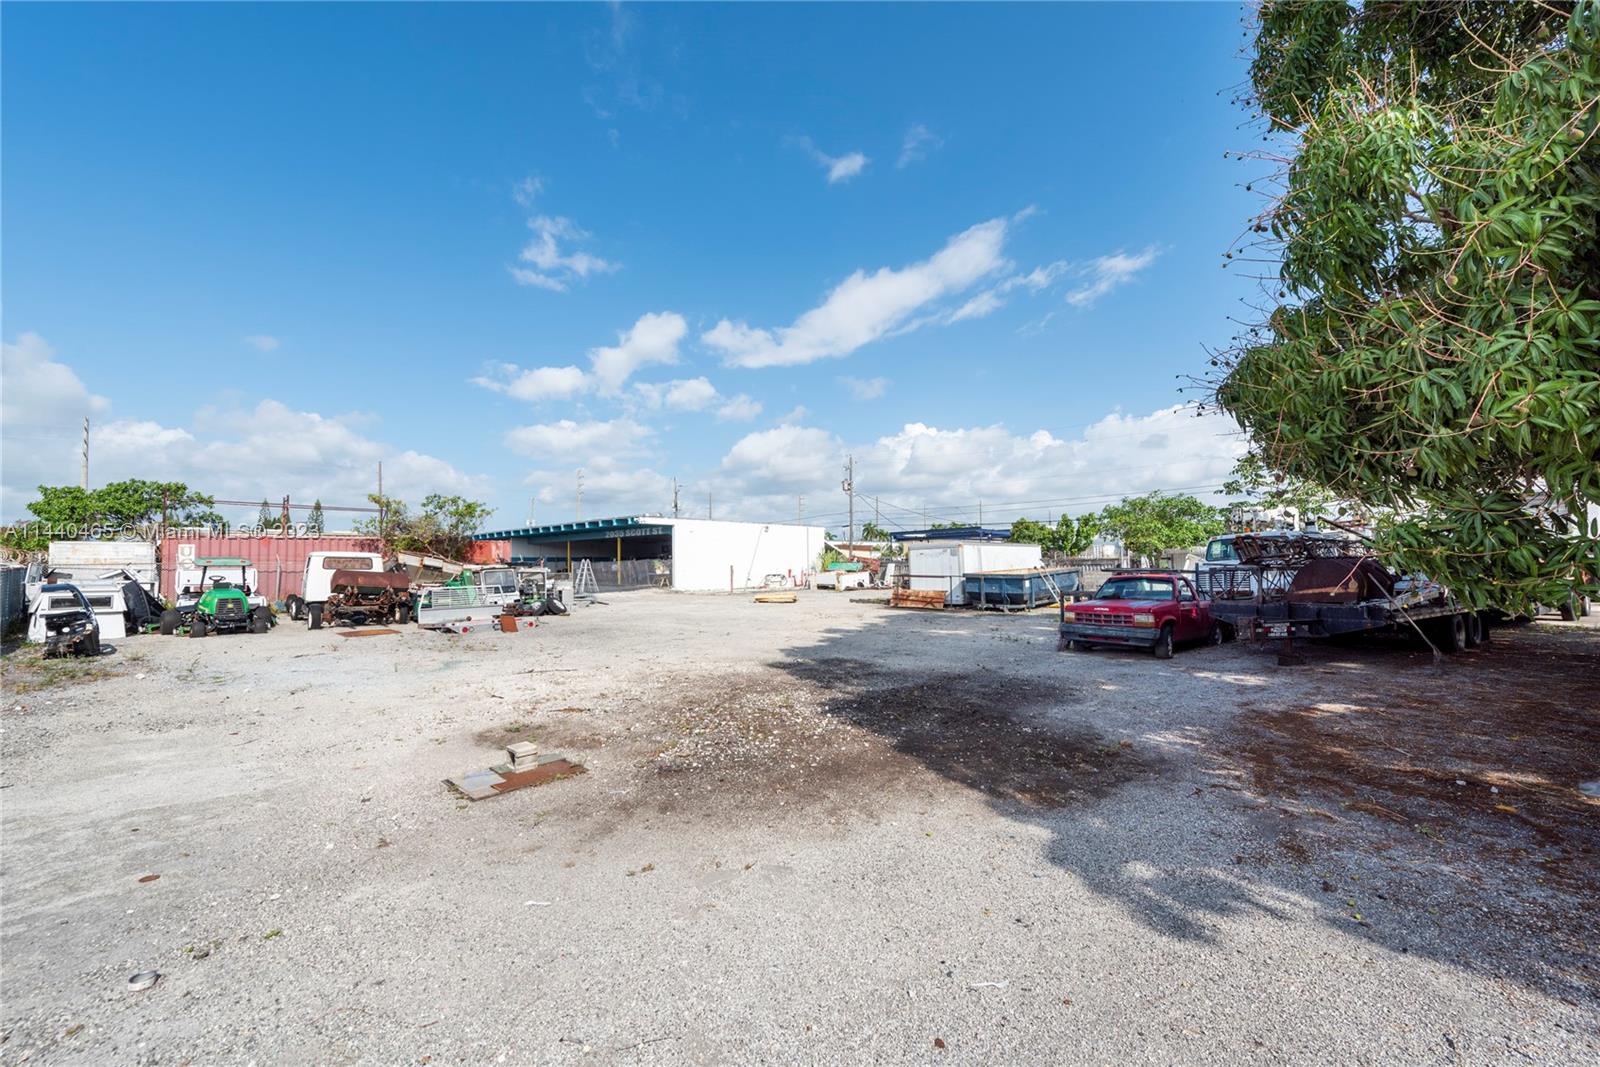 A+++ Location in Hollywood, FL. The available space is 0.5 acre lot. The lot is currently being used as outdoor
storage and parking. Liberal DH-3 Industrial Zoning